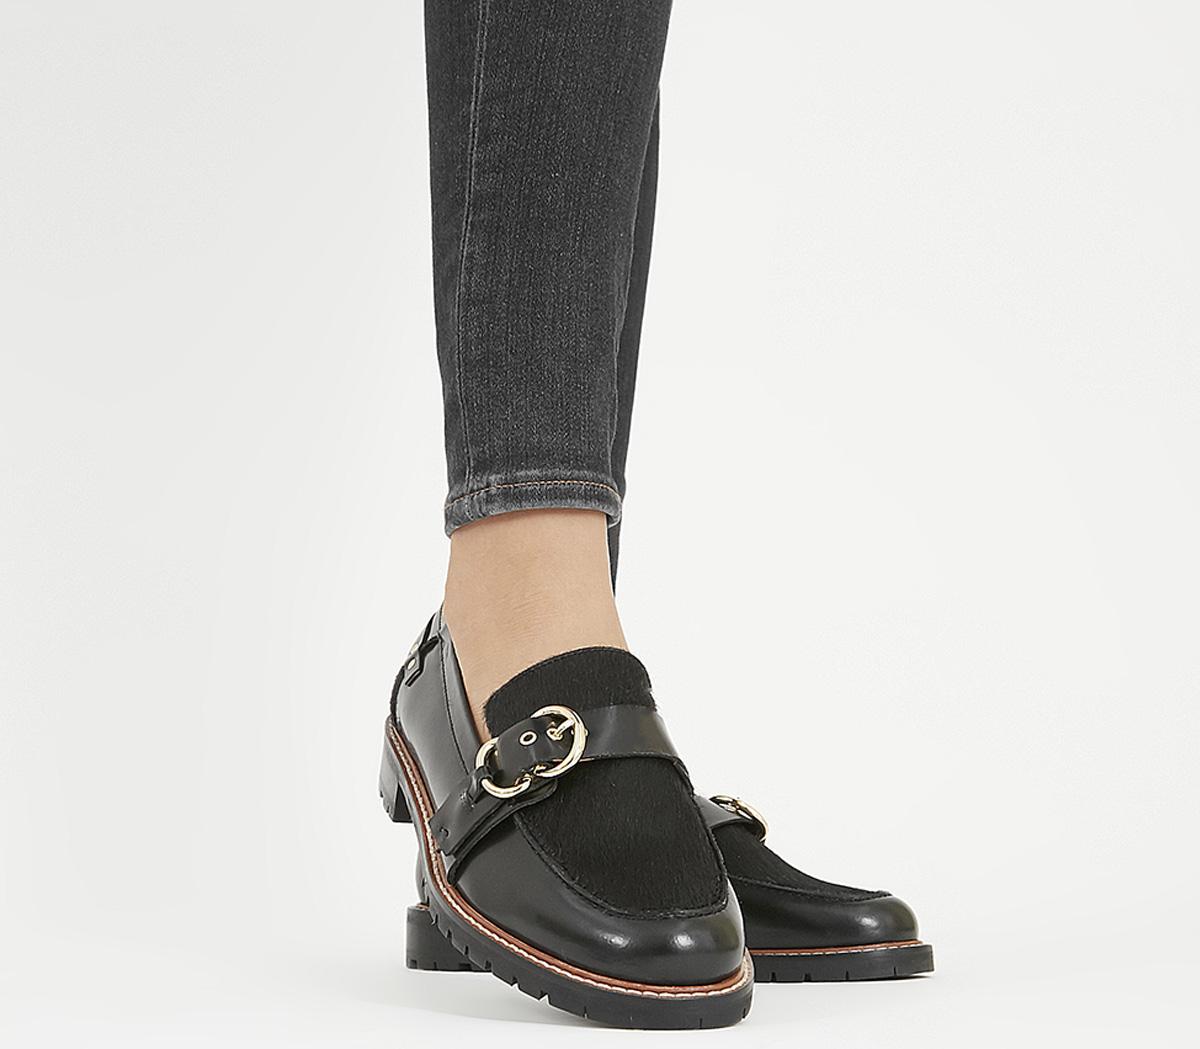 OFFICEFallow Buckle LoafersBlack Box Leather  Pony